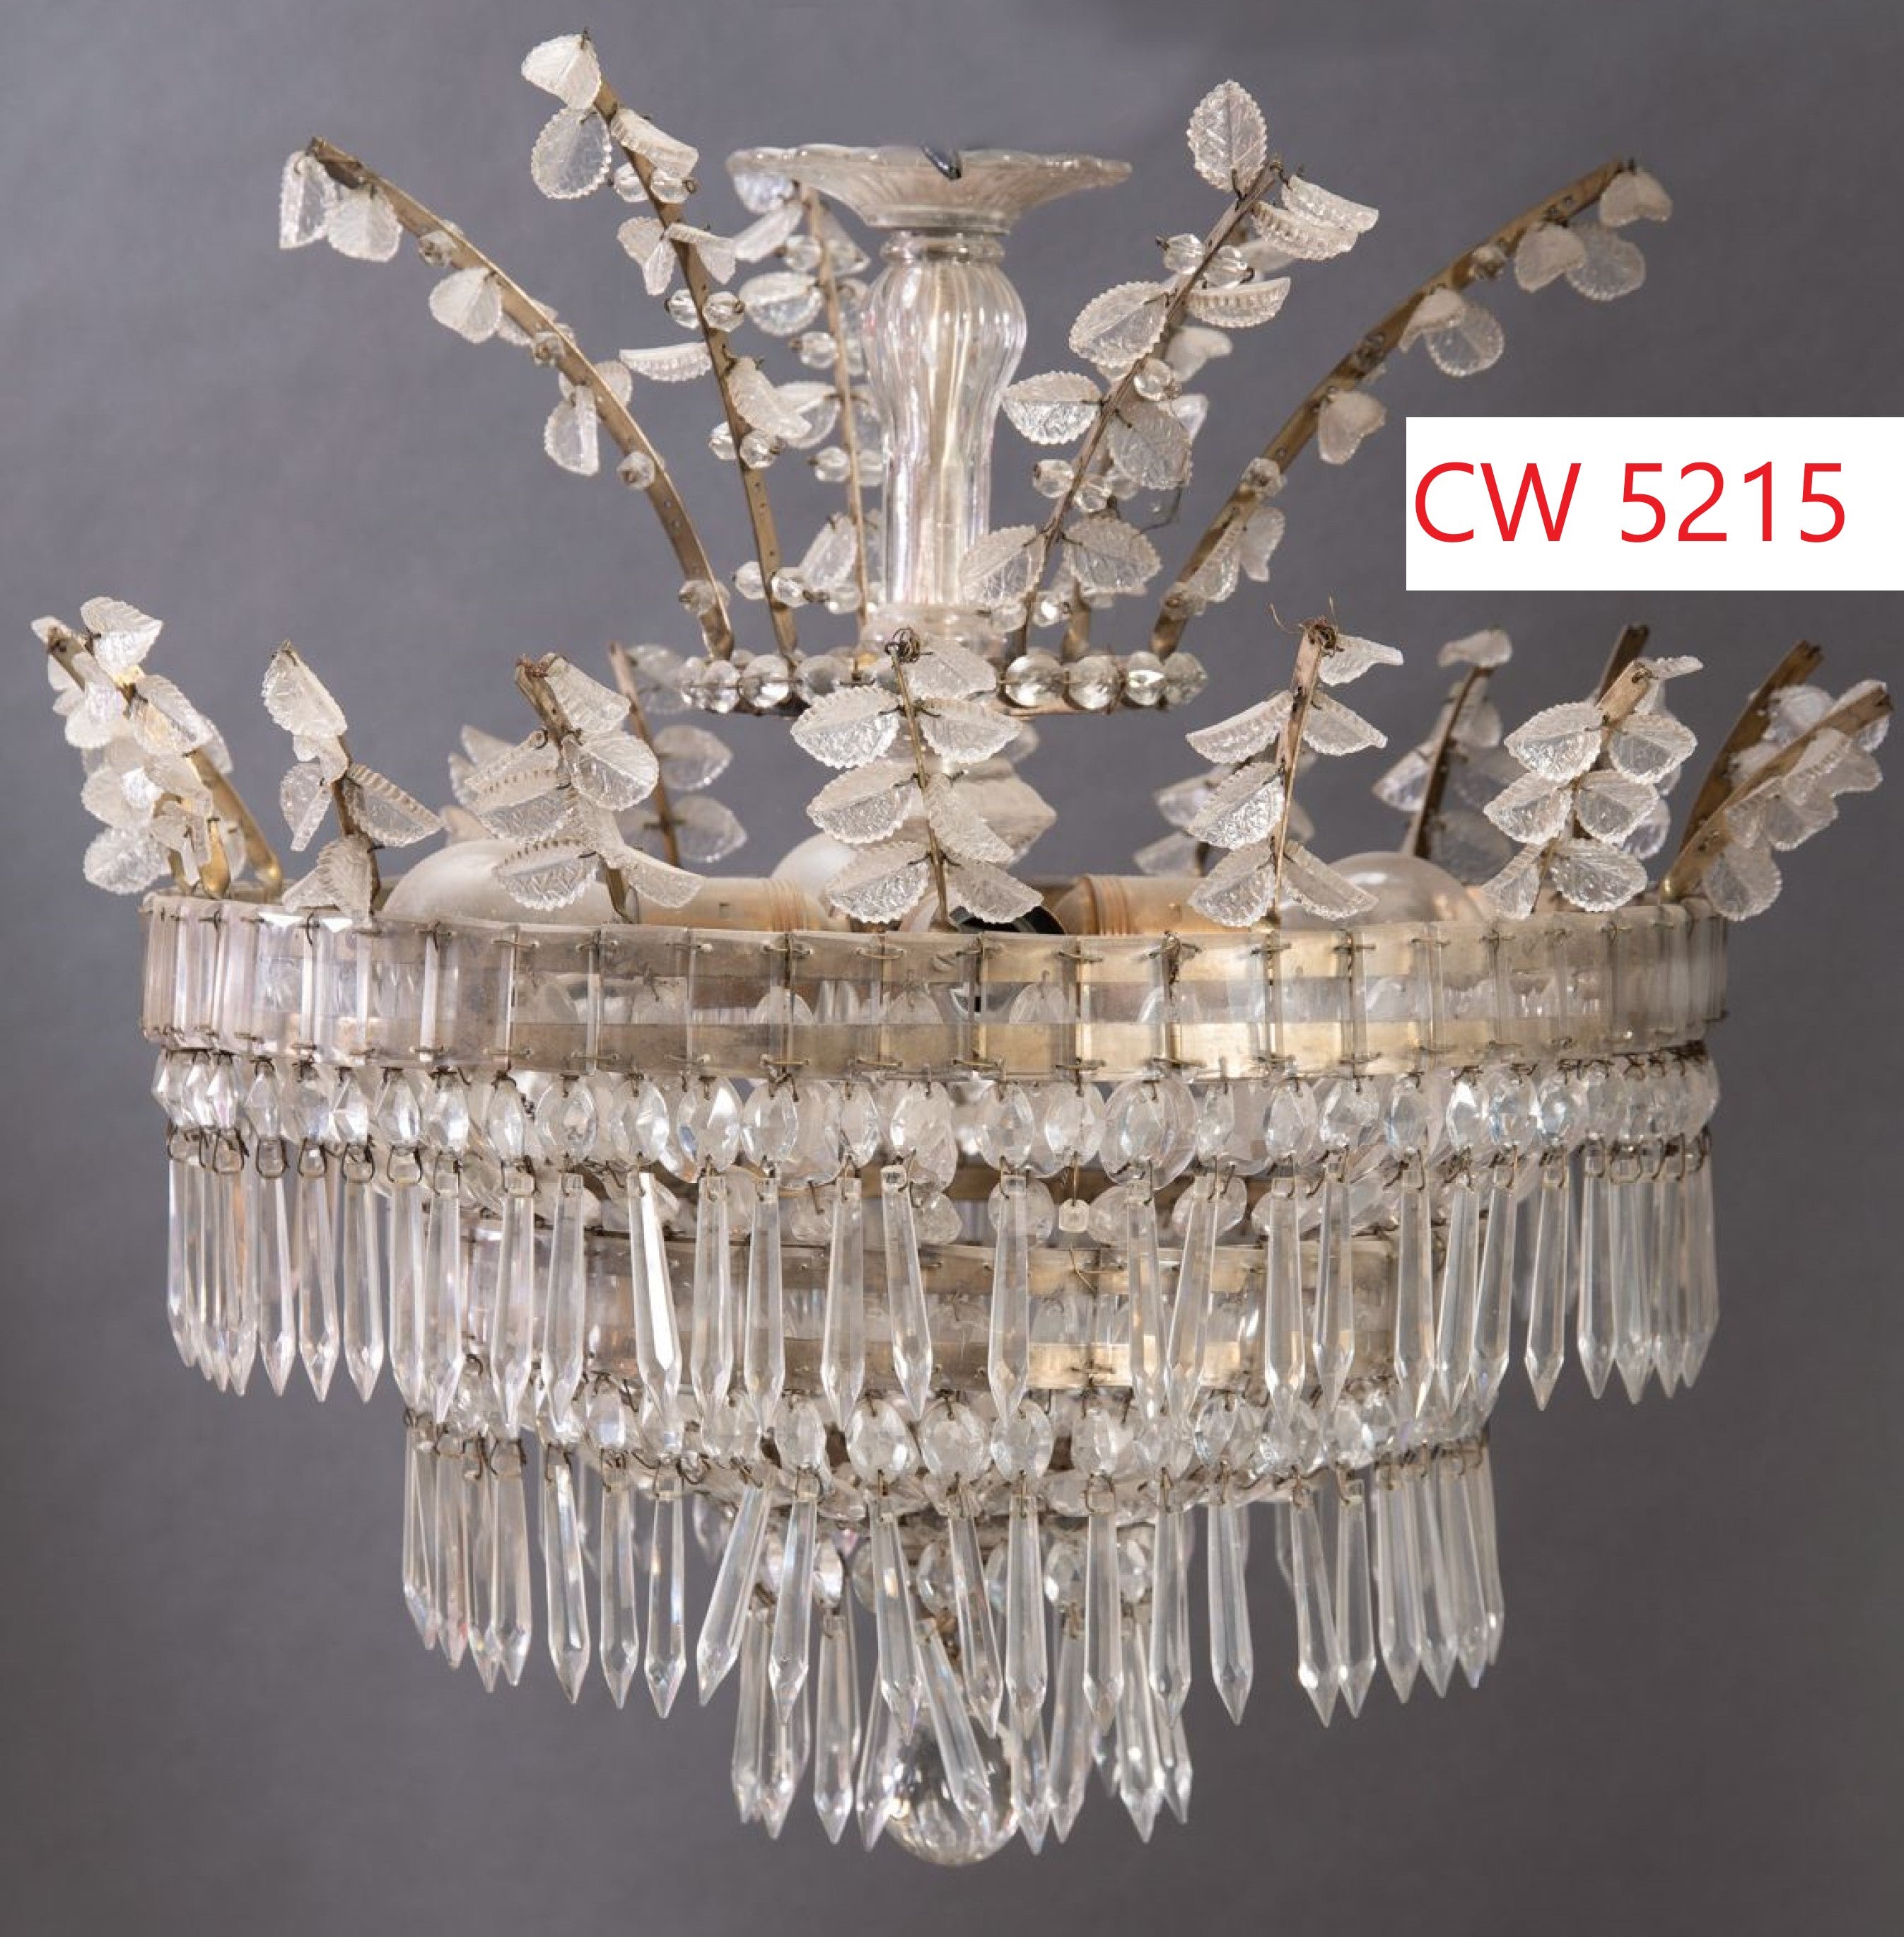 A very fine neo classical Chandelier featuring protruding branches ornate with pressed glass leaves. On the bottom concentric cascades of U-drops. 
CW5215.